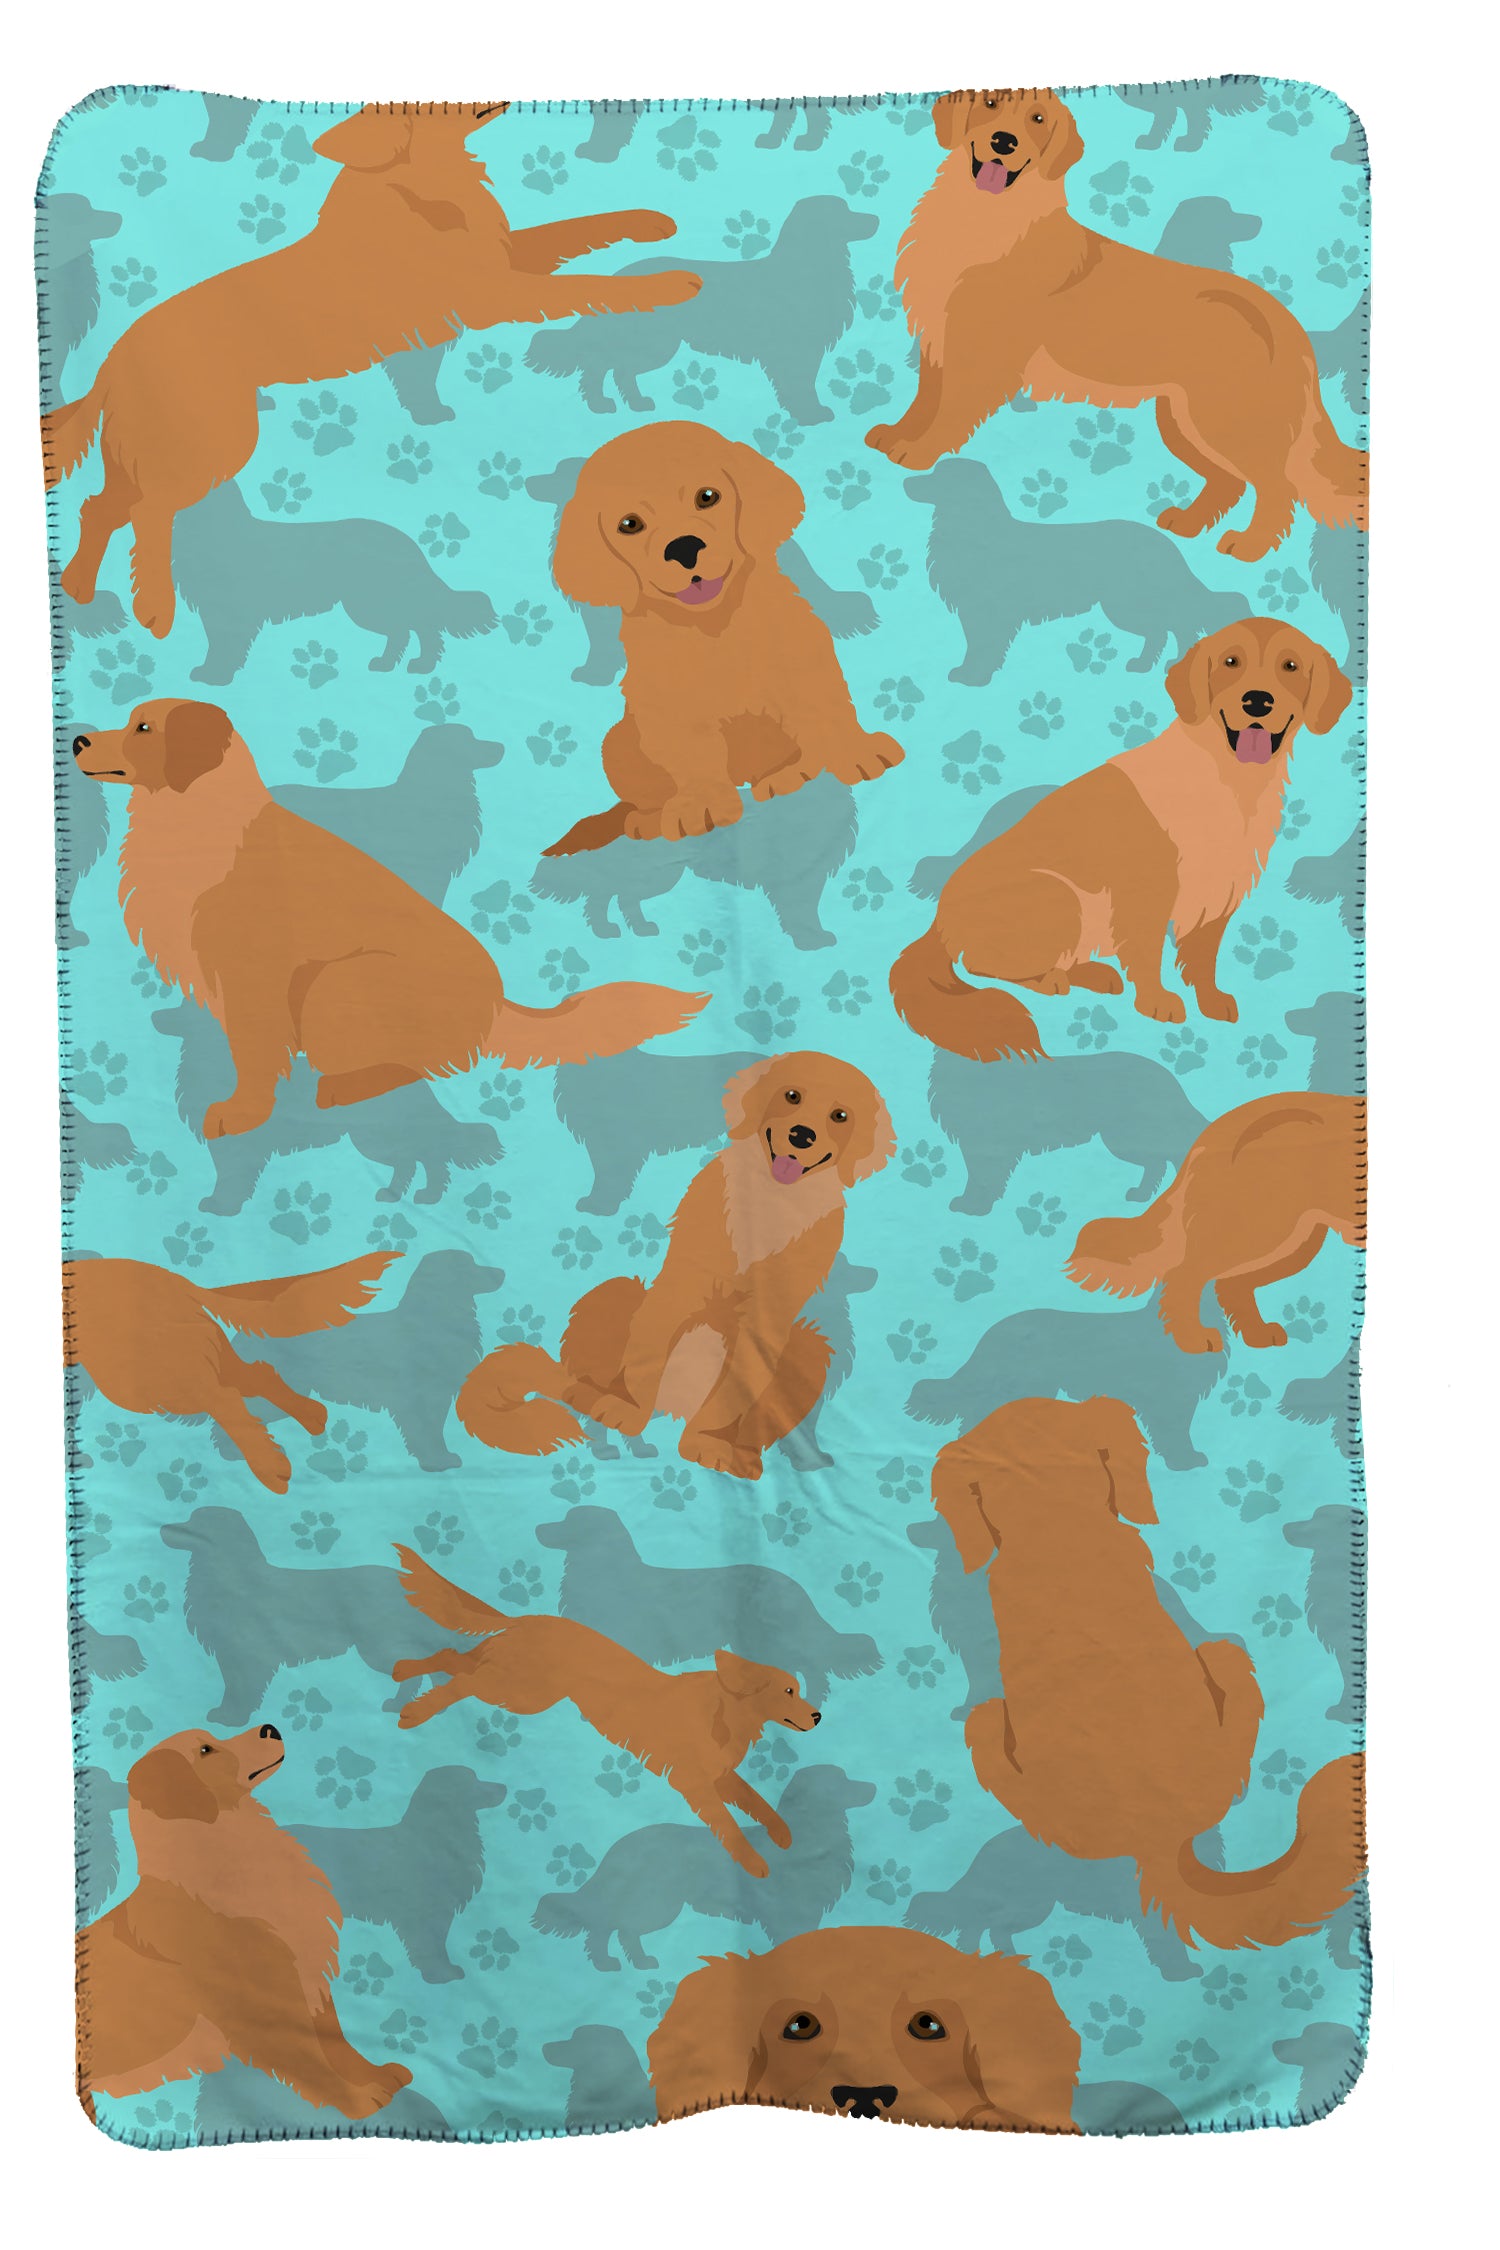 Buy this Golden Retriever Soft Travel Blanket with Bag